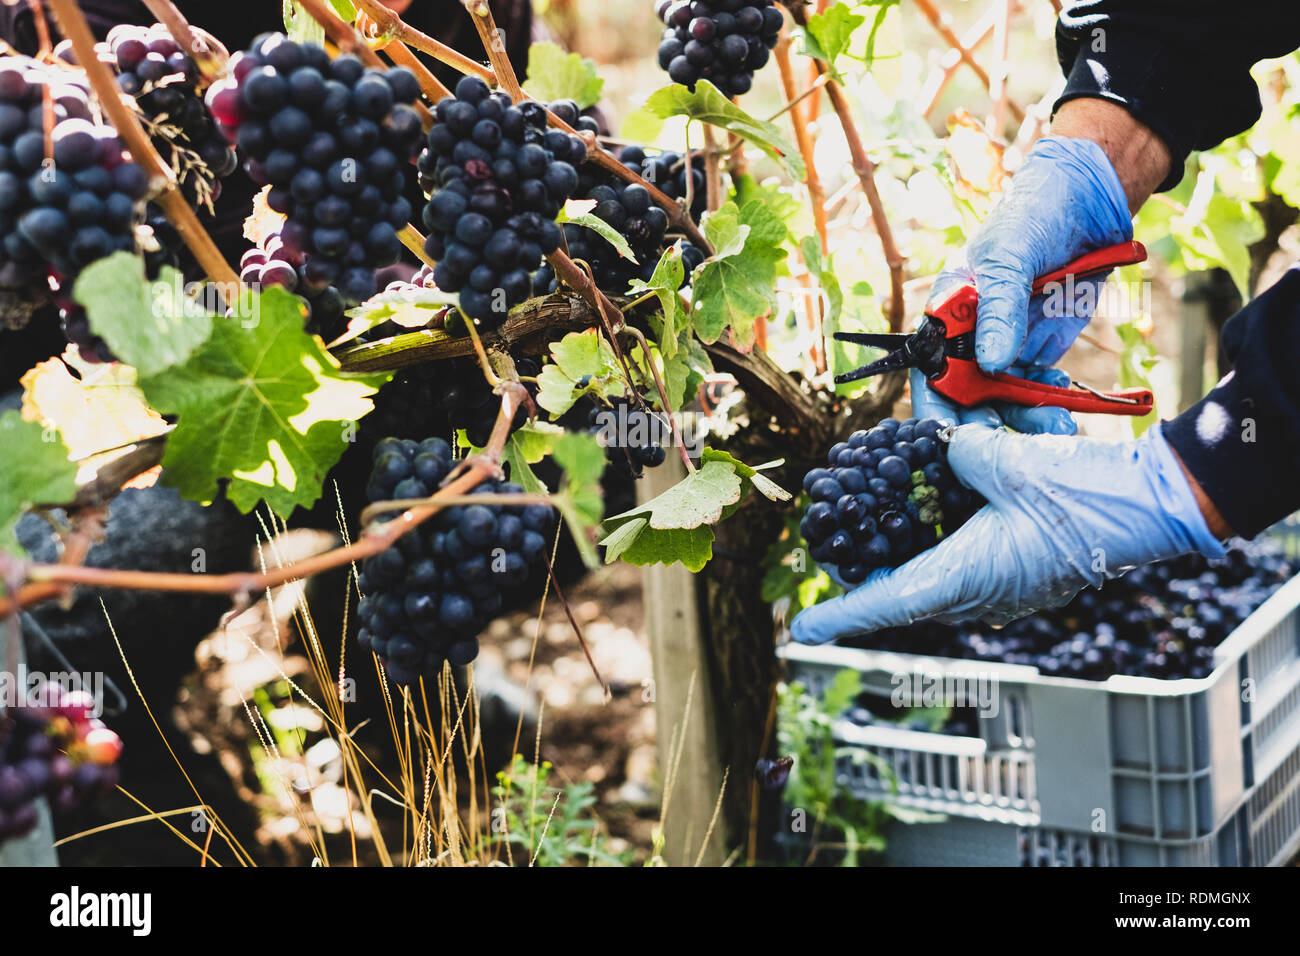 Close up of person wearing rubber gloves and holding secateurs harvesting bunches of black grapes in a vineyard. Stock Photo